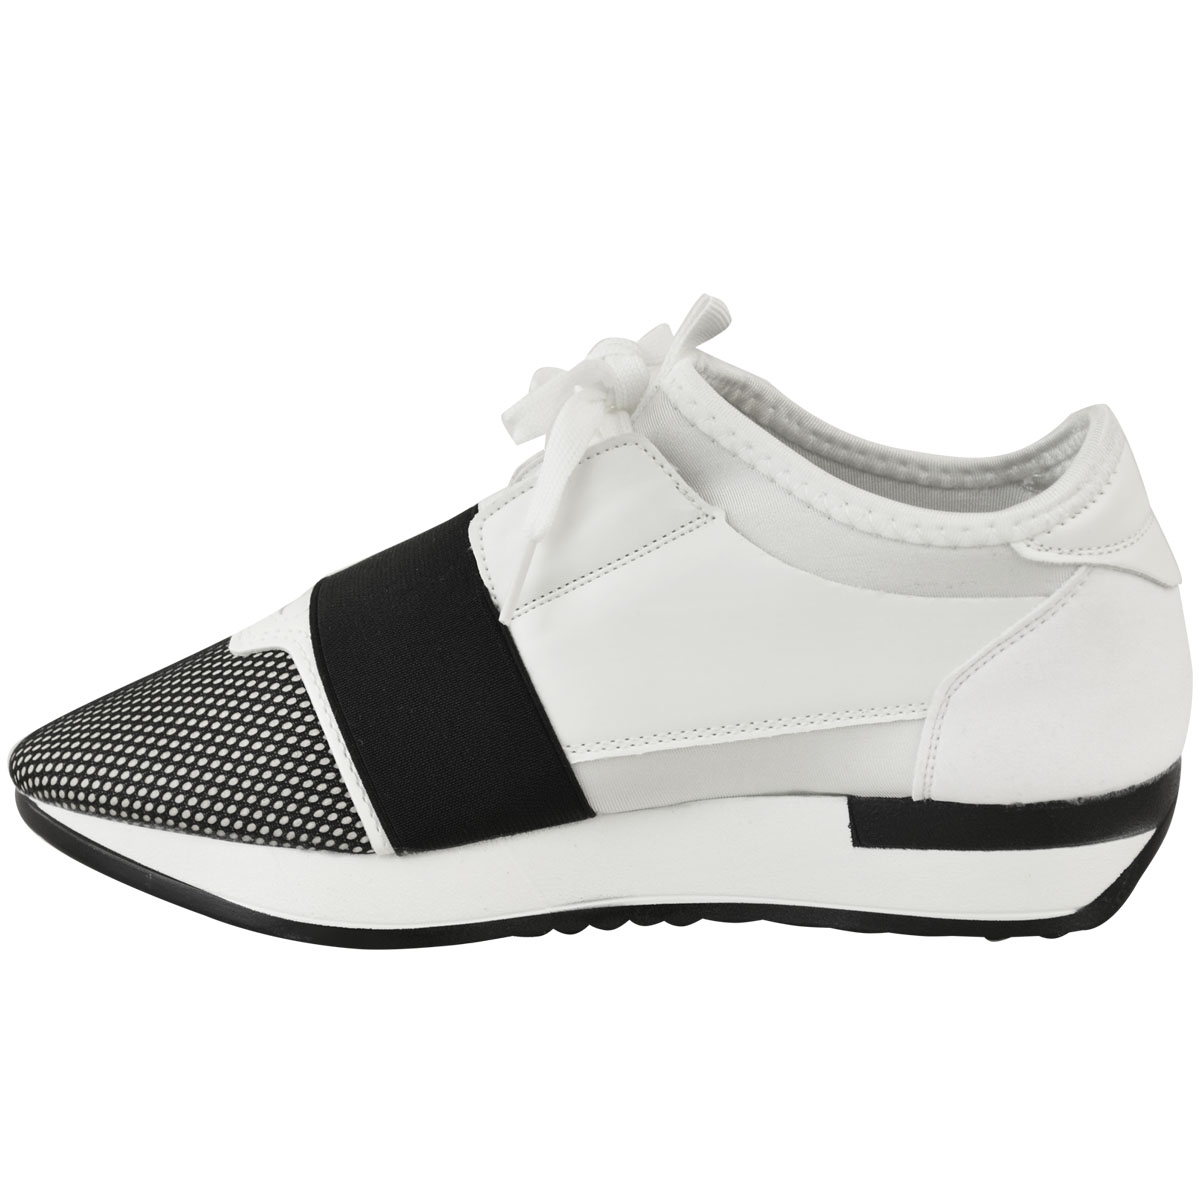 comfy trainers womens